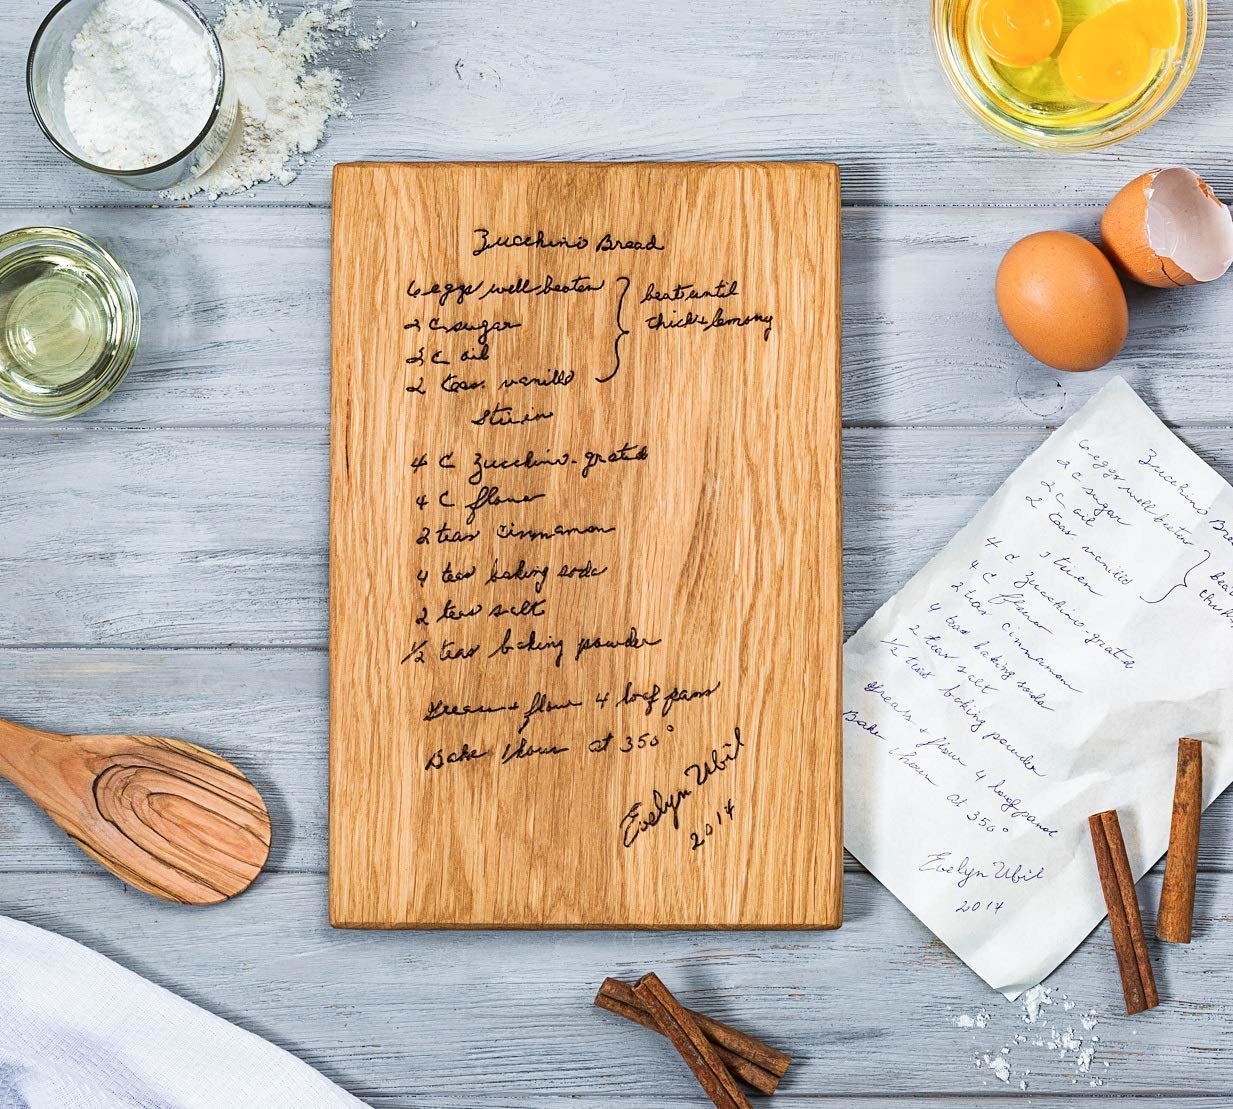 The wooden cutting board engraved with a recipe, next to a piece of paper with the handwritten recipe and surrounded by baking accessories and ingredients